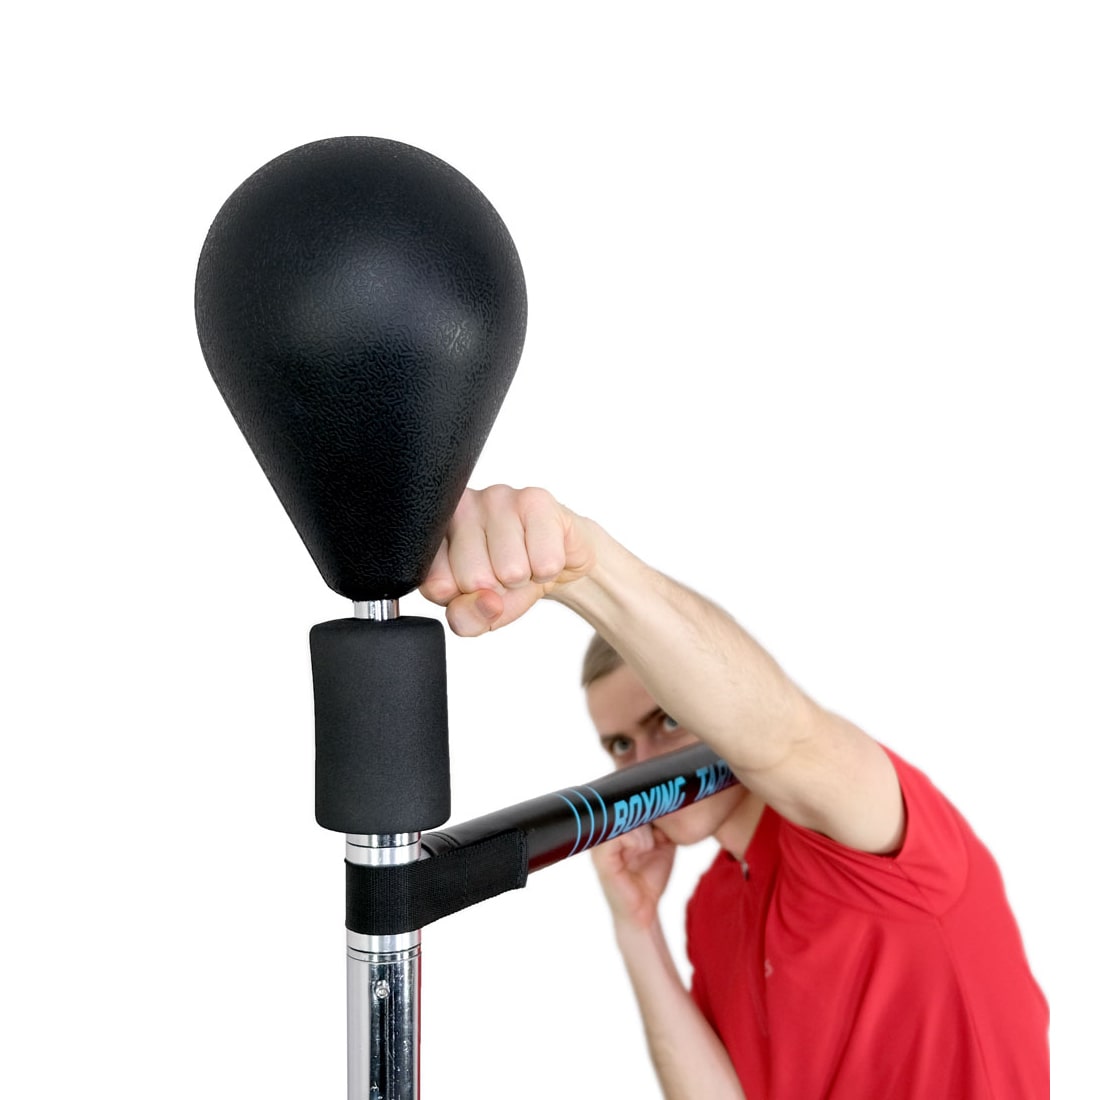 Livepro Free-Standing Boxing Stand - Rotating Target